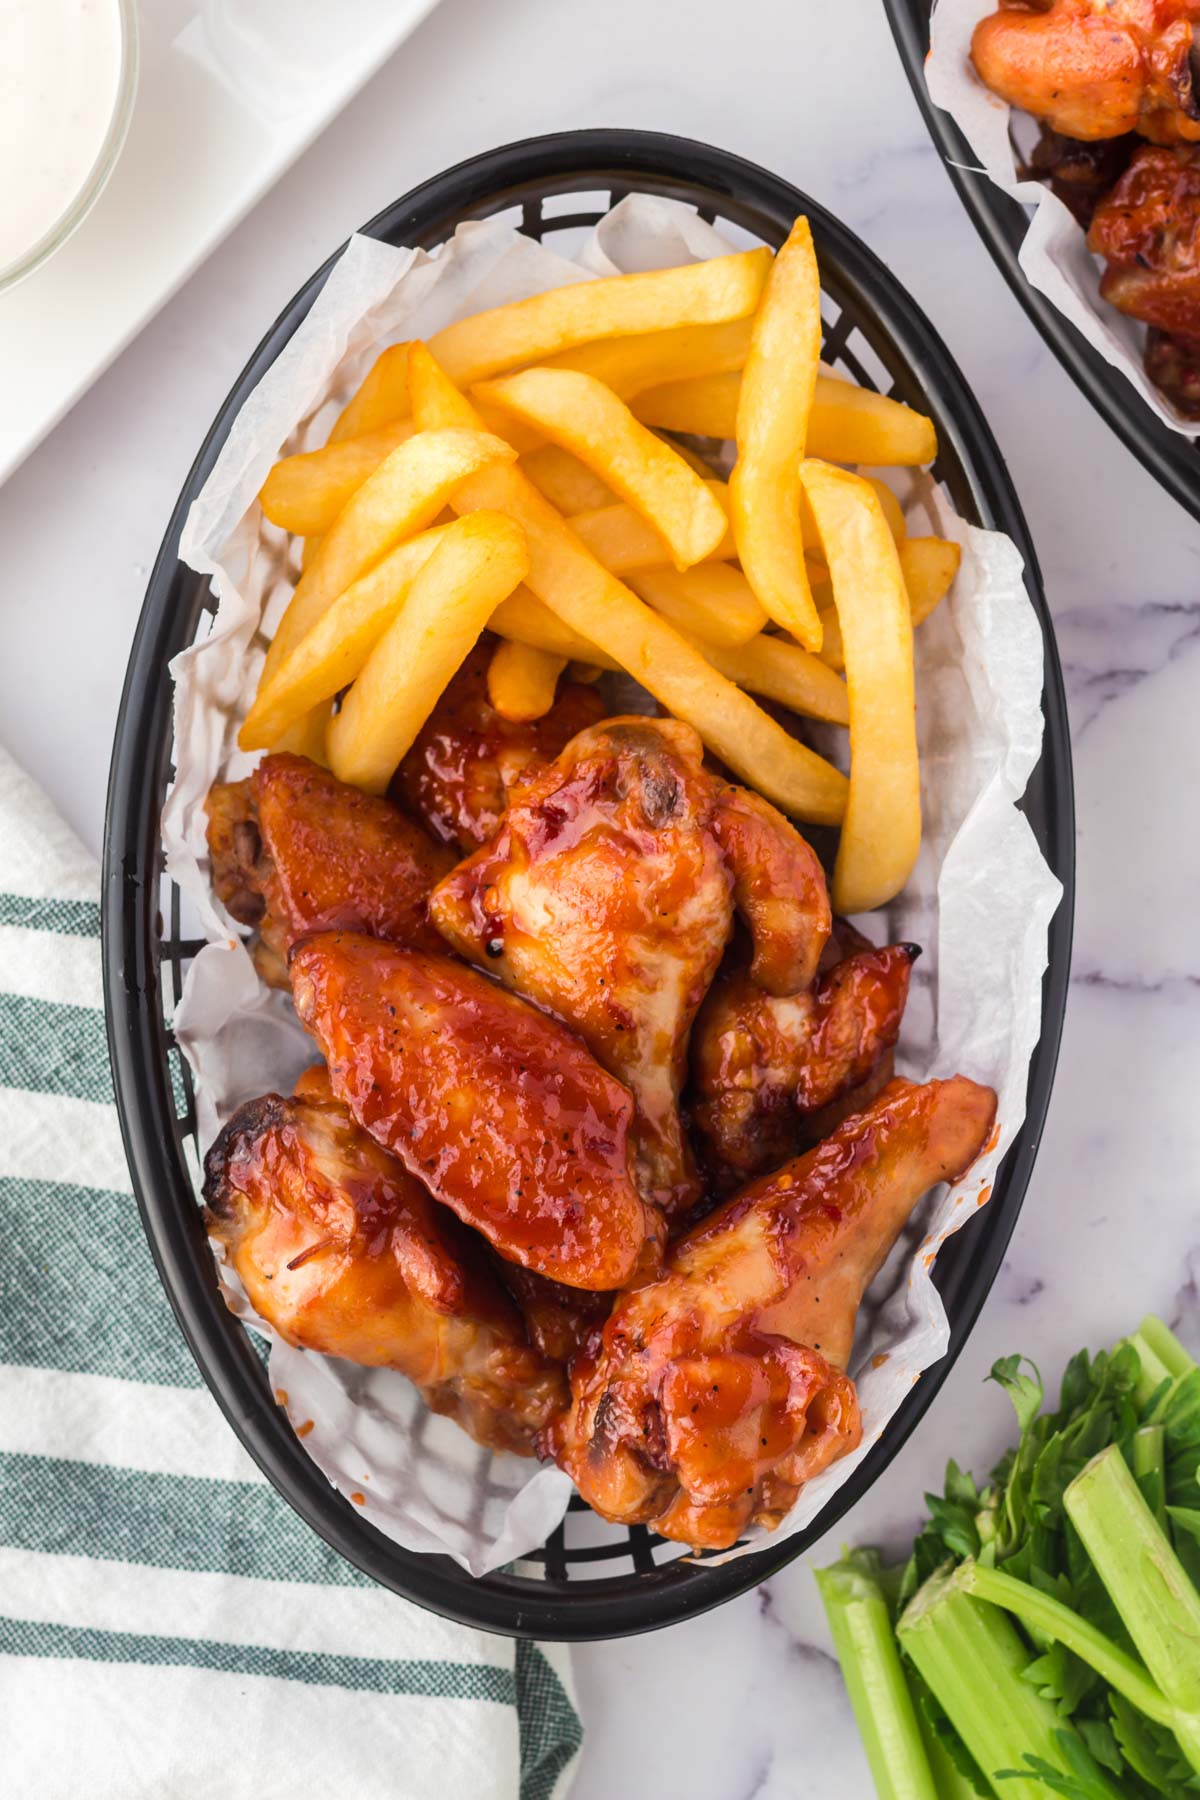 bbq chicken wings in a basket with fries